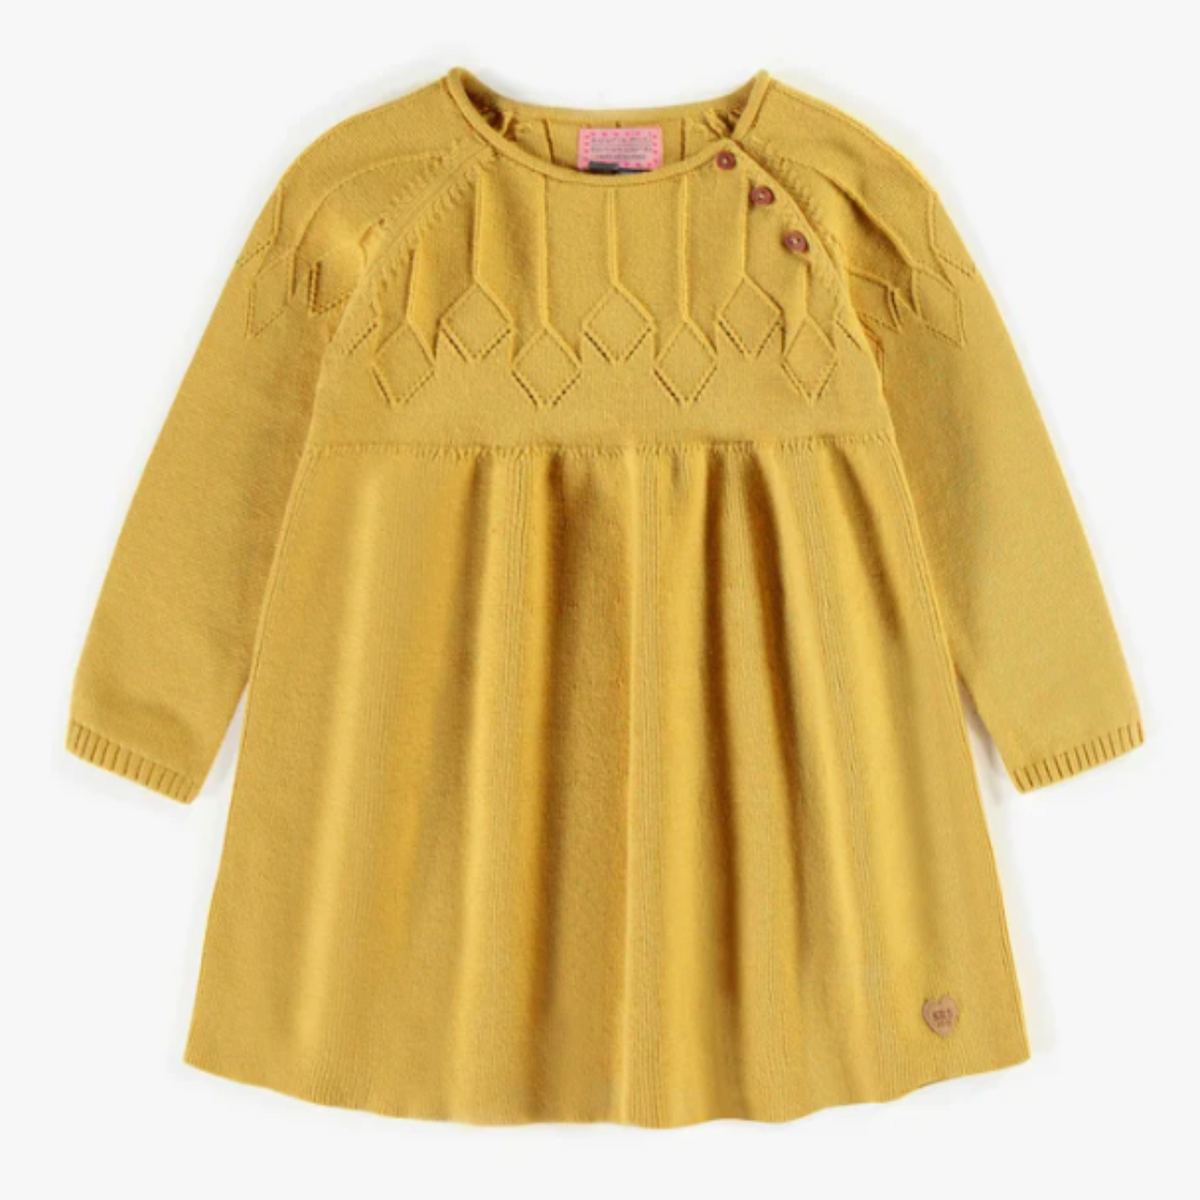 Yellow knit dress with long-sleeves